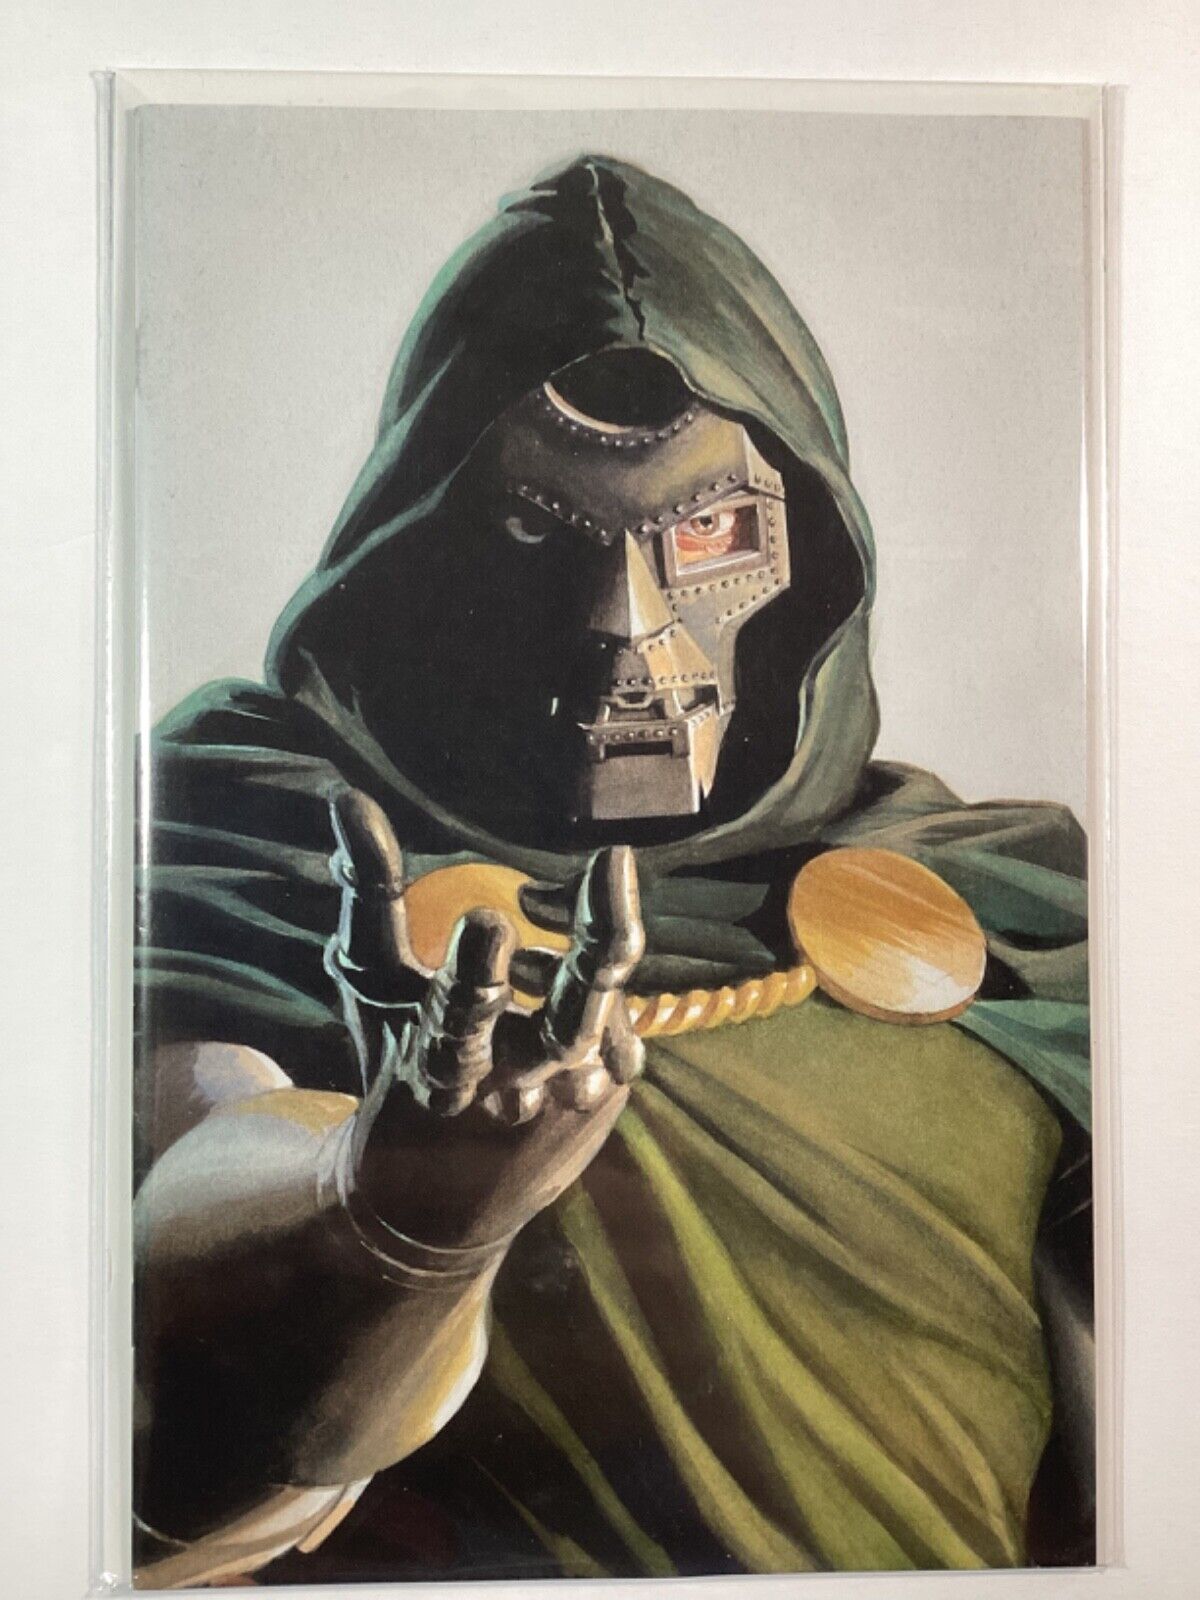 GUARDIANS OF THE GALAXY #1B NM- 9.2 🎥DOCTOR DOOM; COMING TO THE MCU🎥ALEX ROSS